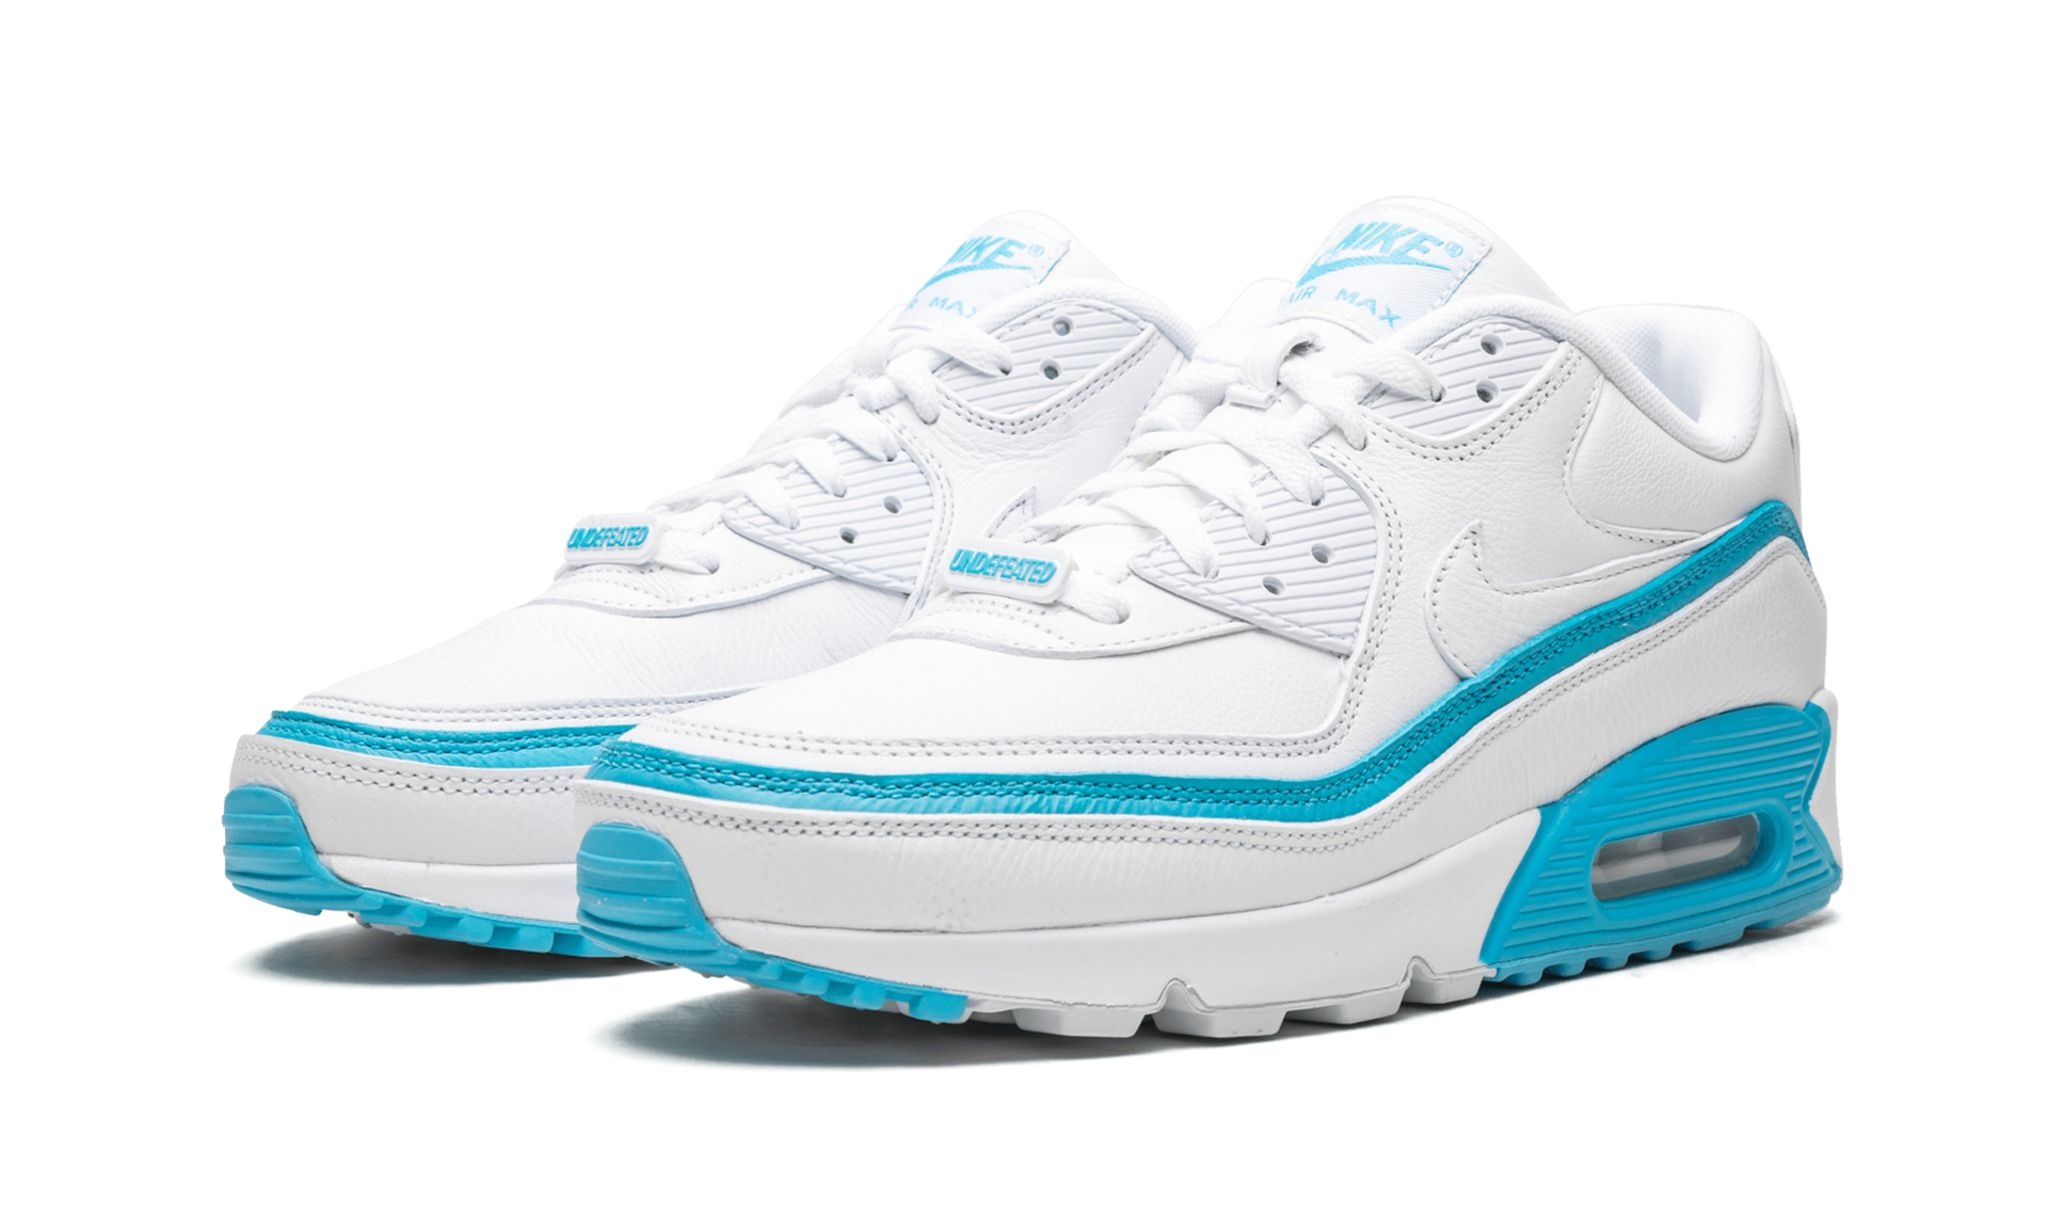 Air Max 90 / UNDFTD "Undefeated - White/Blue Fury" - 2